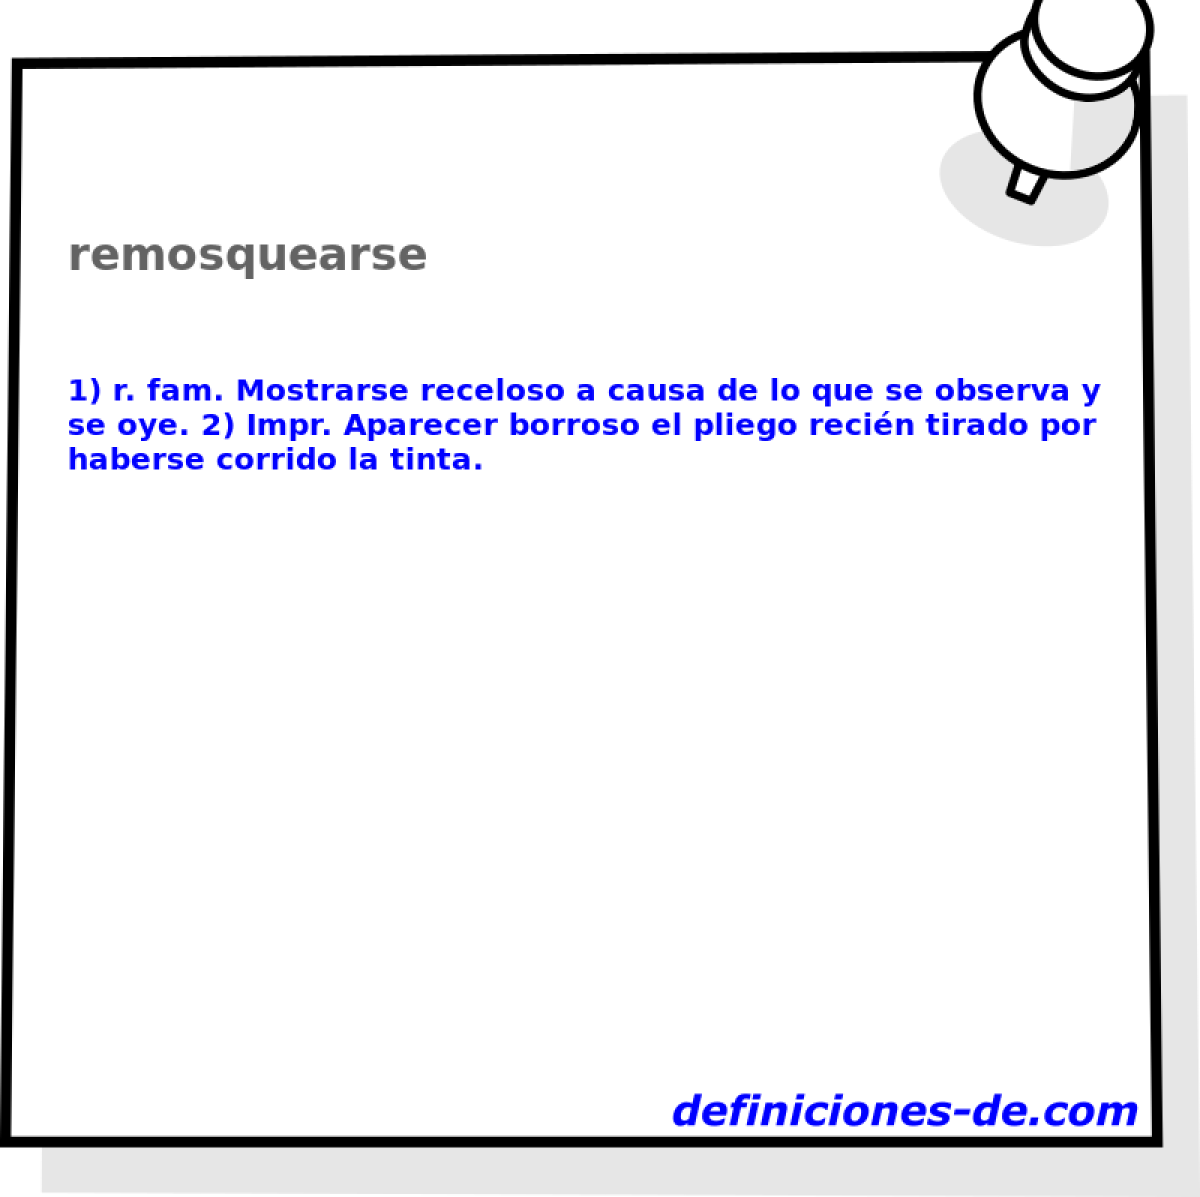 remosquearse 